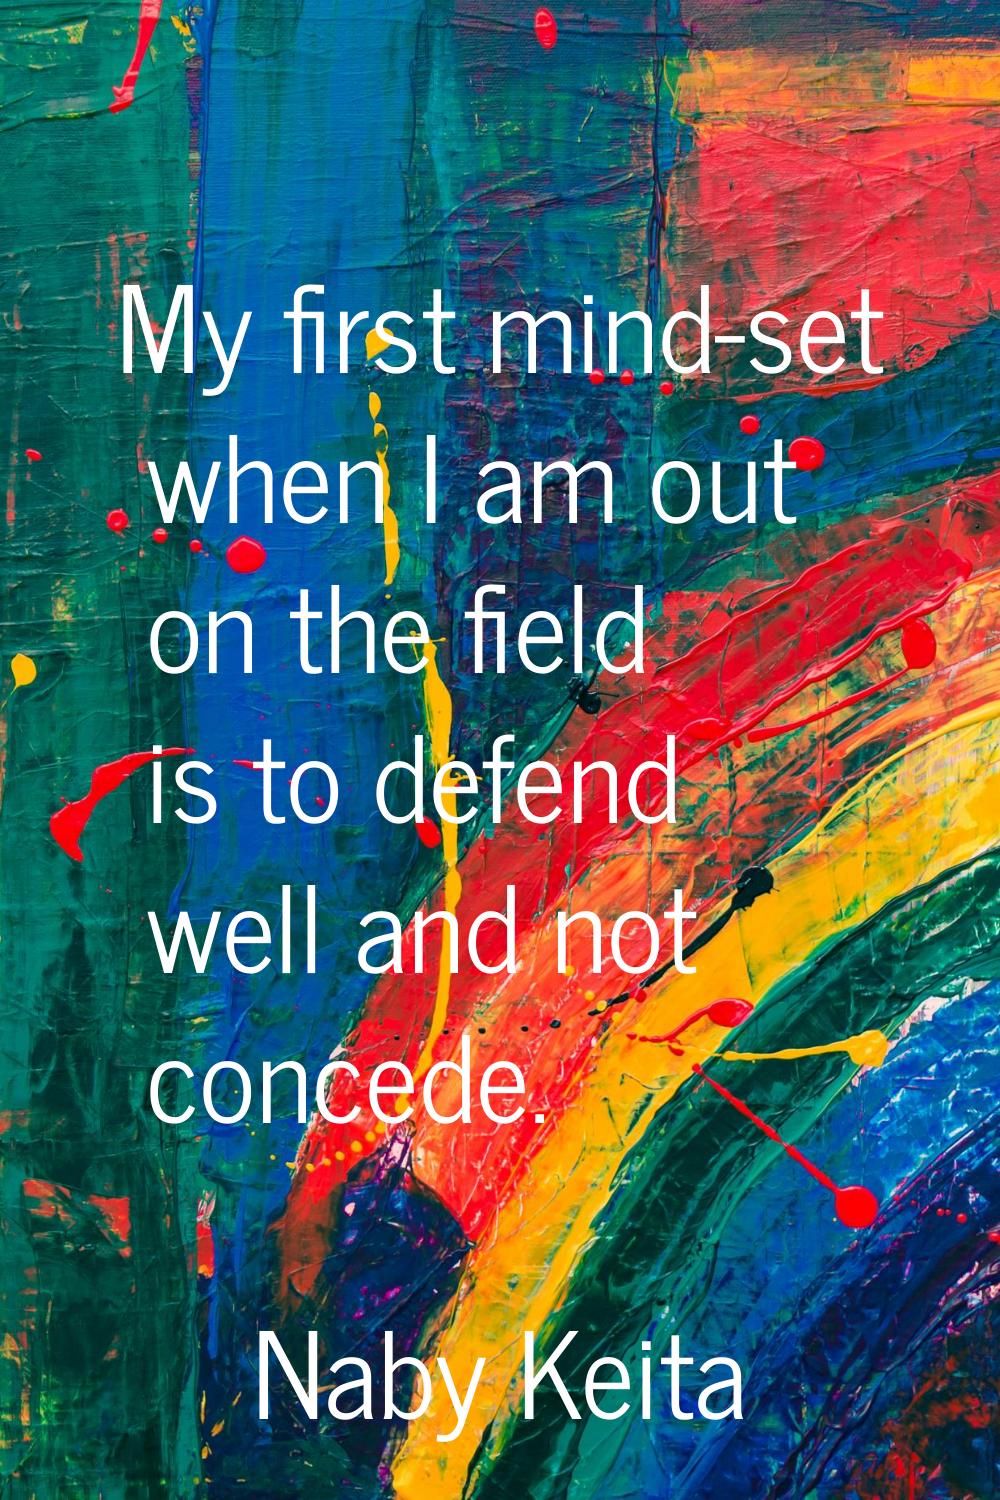 My first mind-set when I am out on the field is to defend well and not concede.